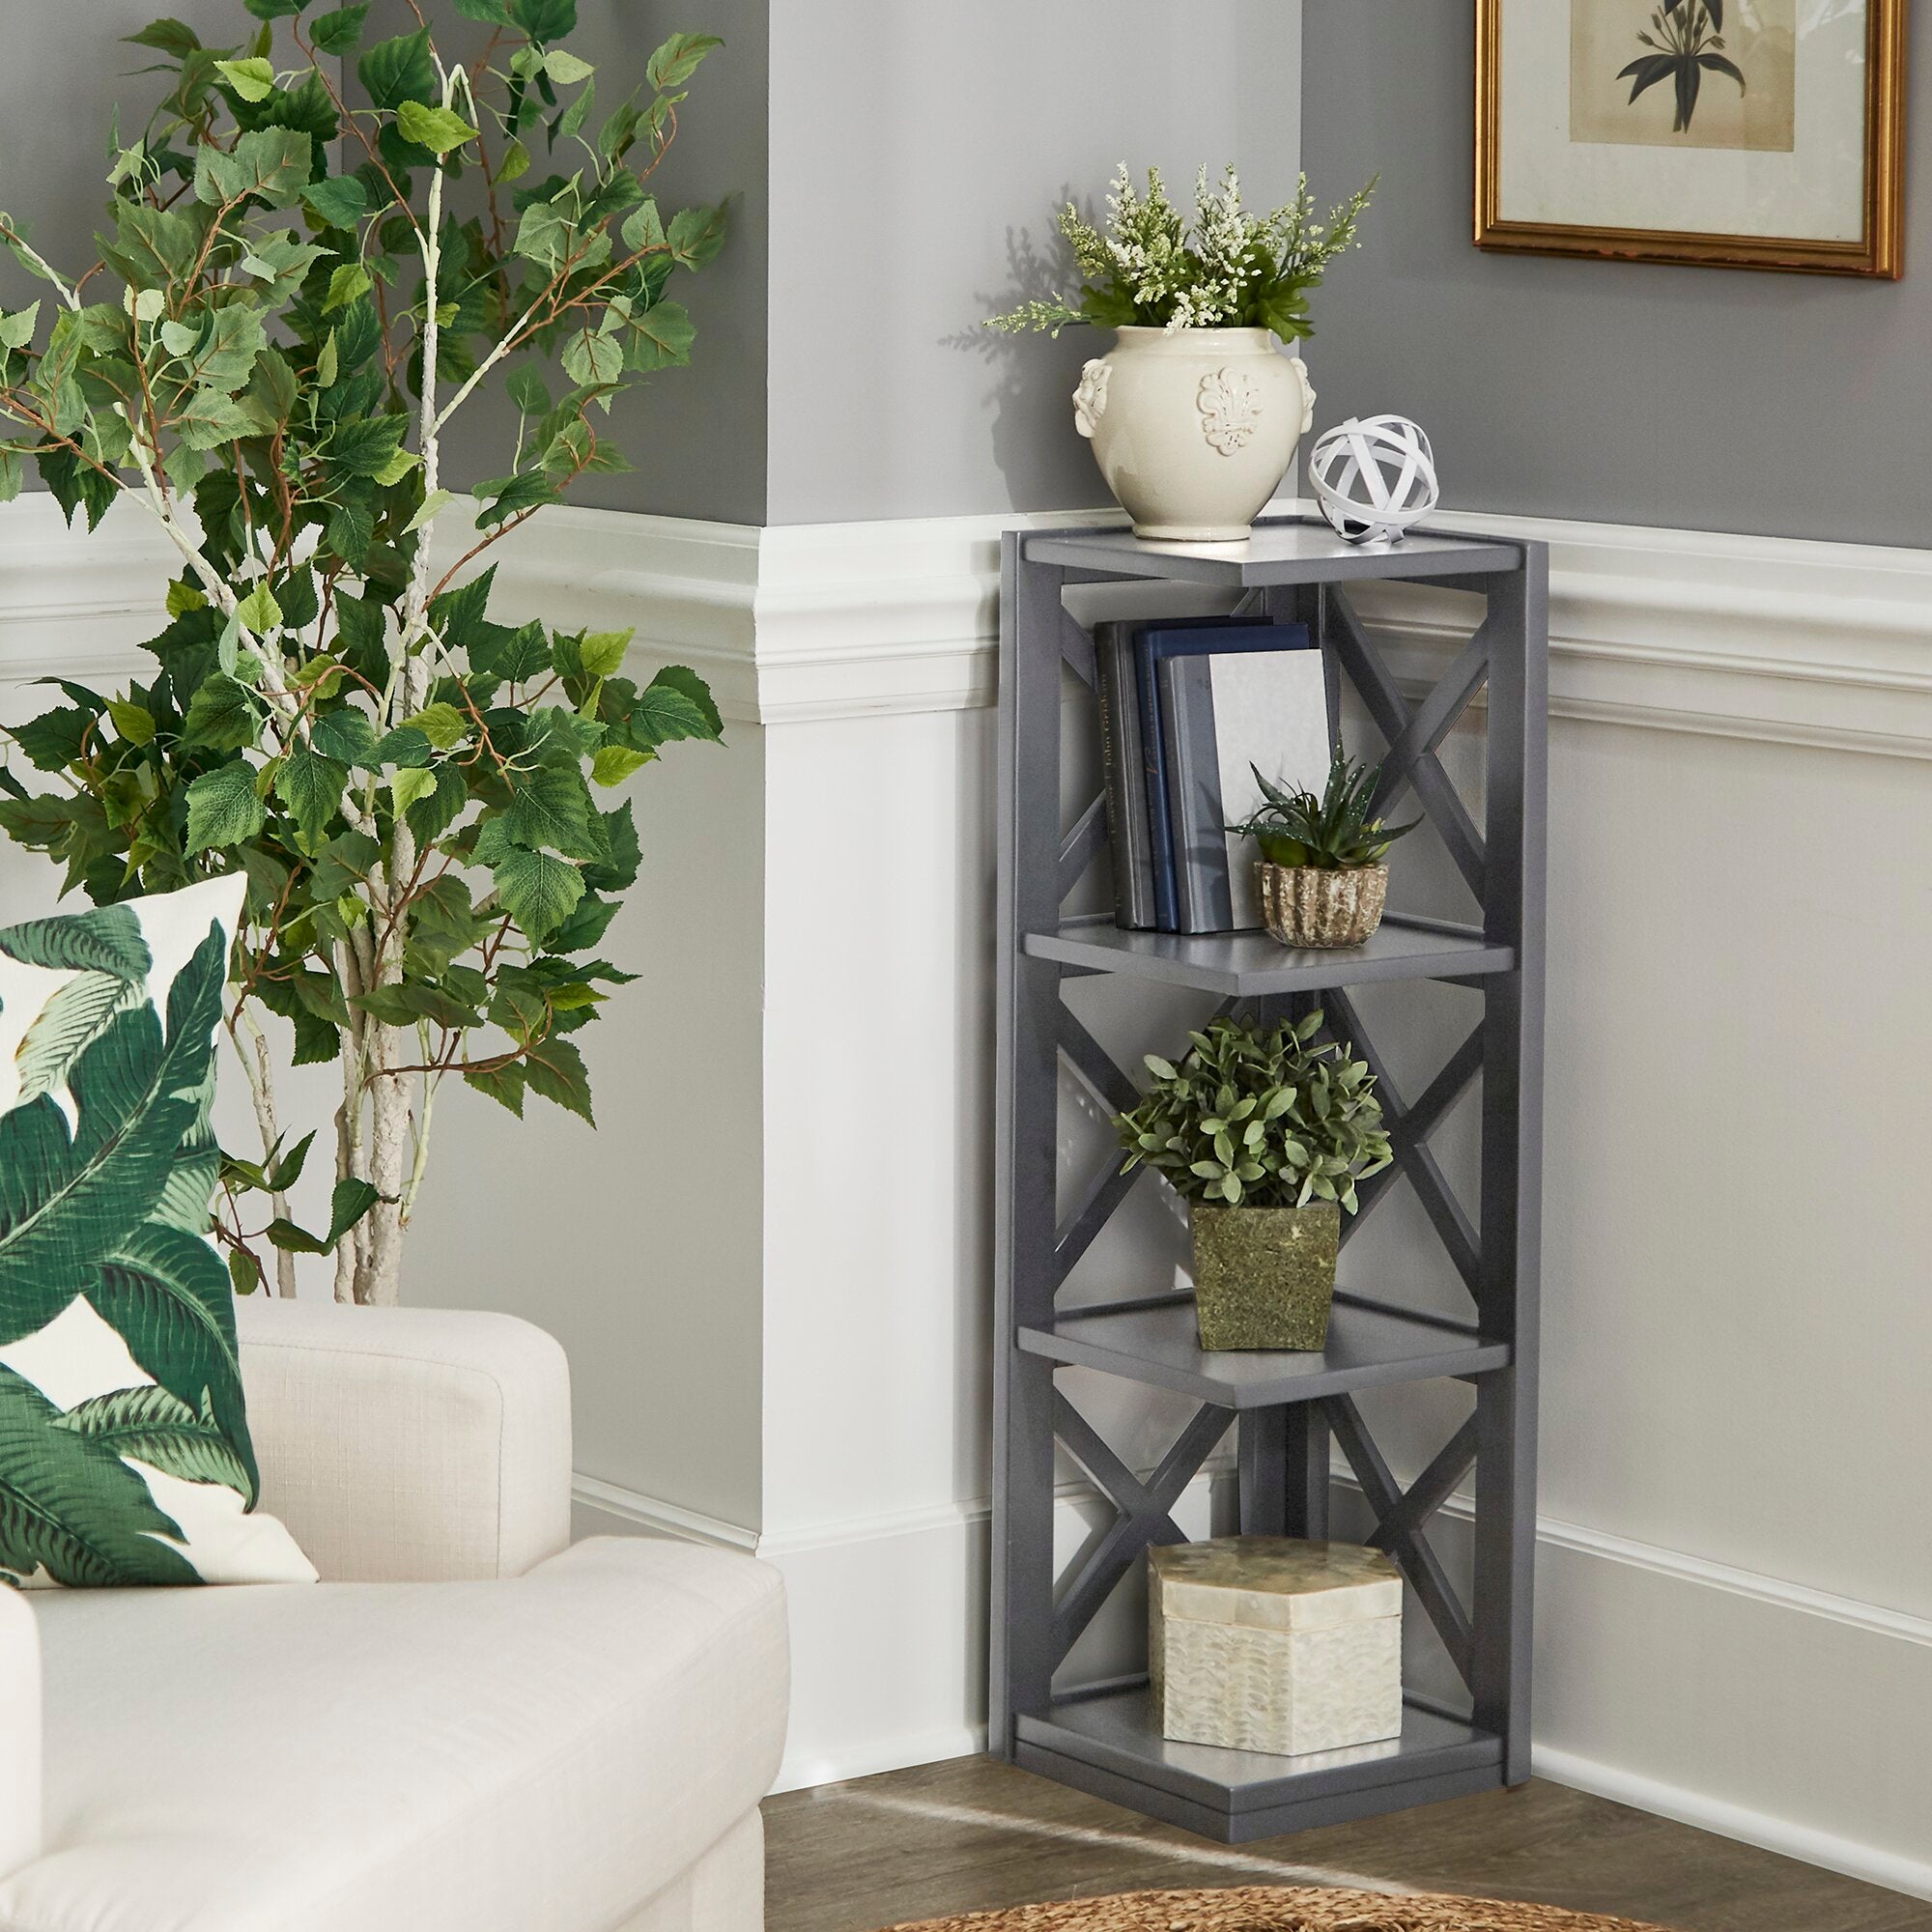 Gray four-tier corner book shelf with X's along the side and plants and books on display